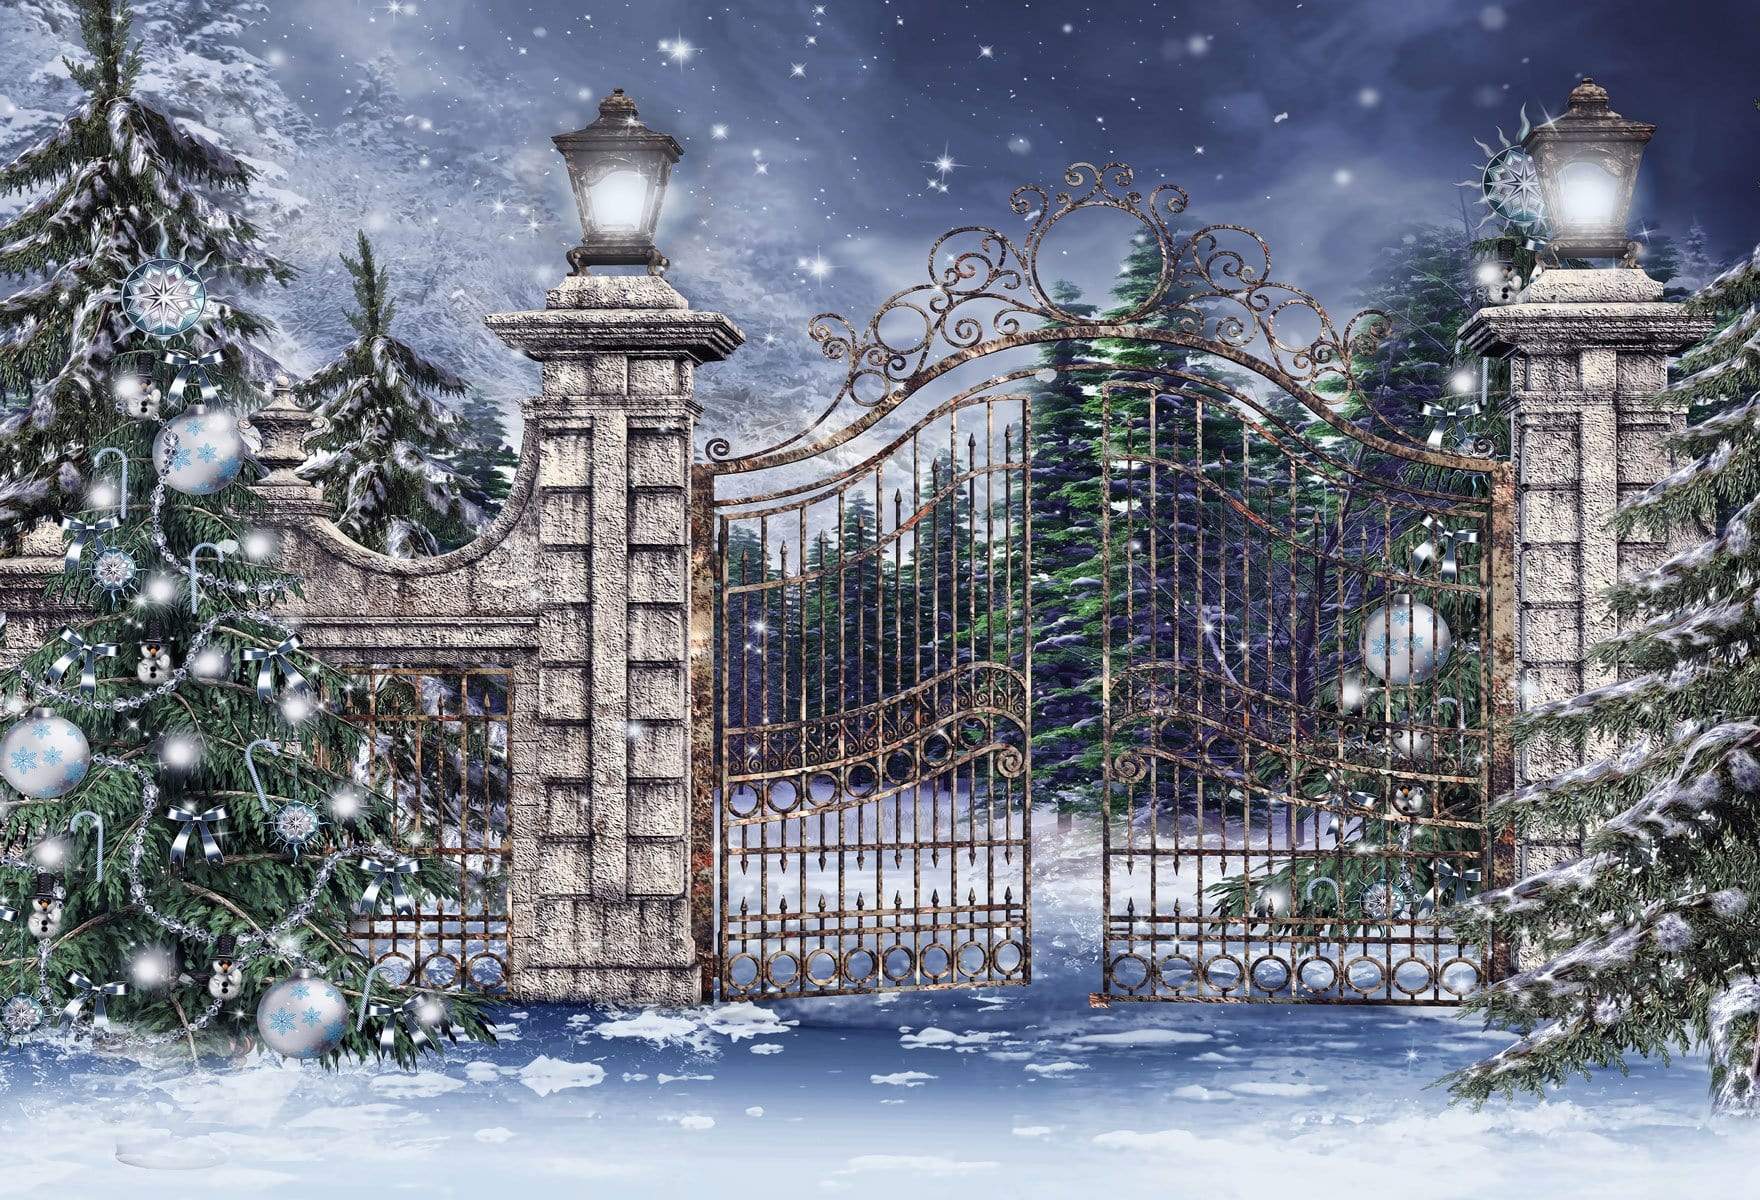 Kate Gate and Christmas Tree With Snow For Photography